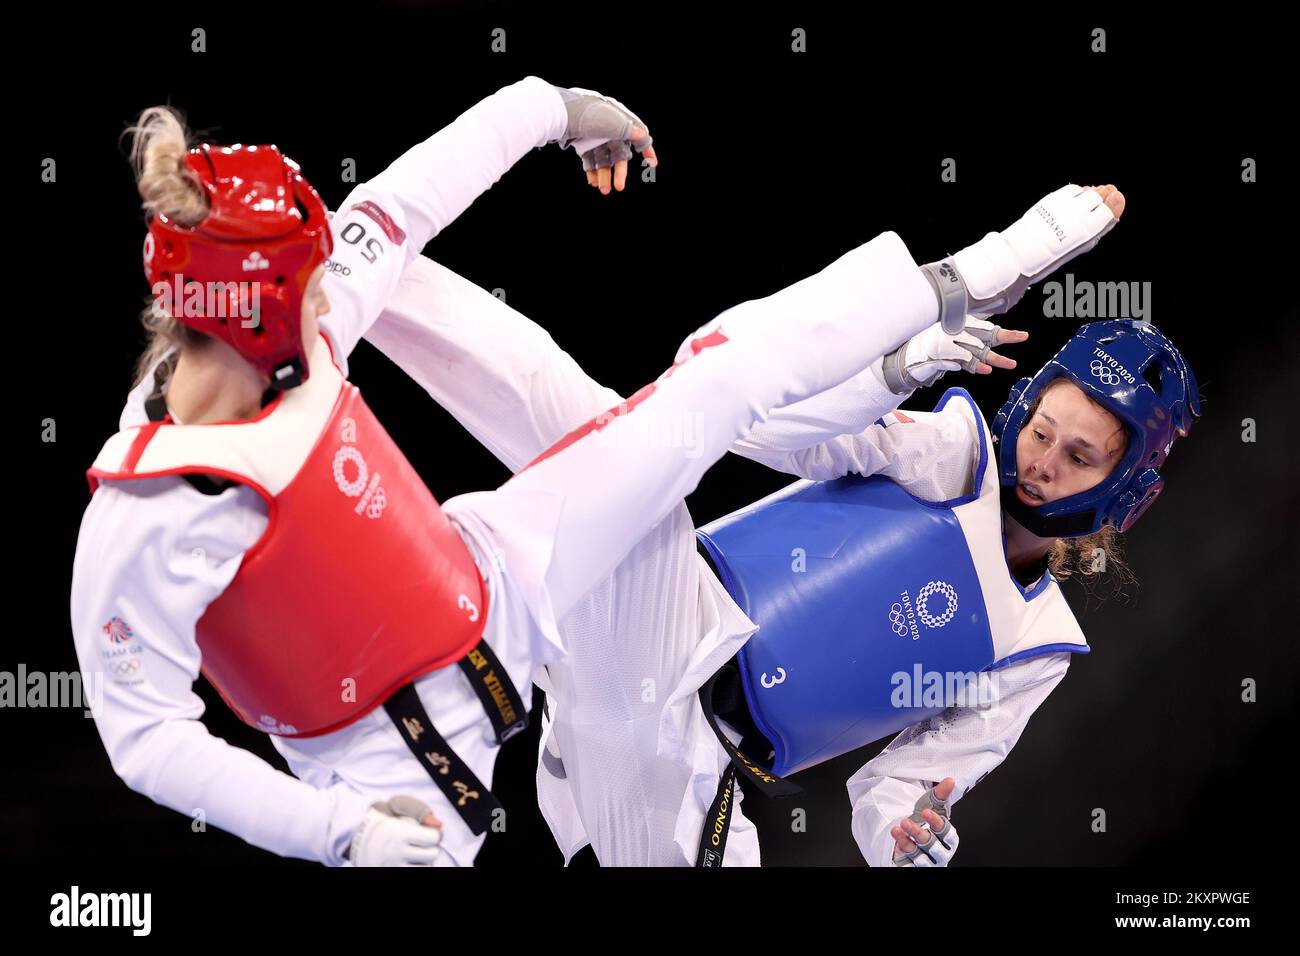 Matea Jelic (R) of Croatia competes against Lauren Williams of Great Britain during the Women's -67kg Taekwondo Final on day three of the Tokyo 2020 Olympic Games at Makuhari Messe Hall on July 26, 2021 in Chiba, Japan. Stock Photo